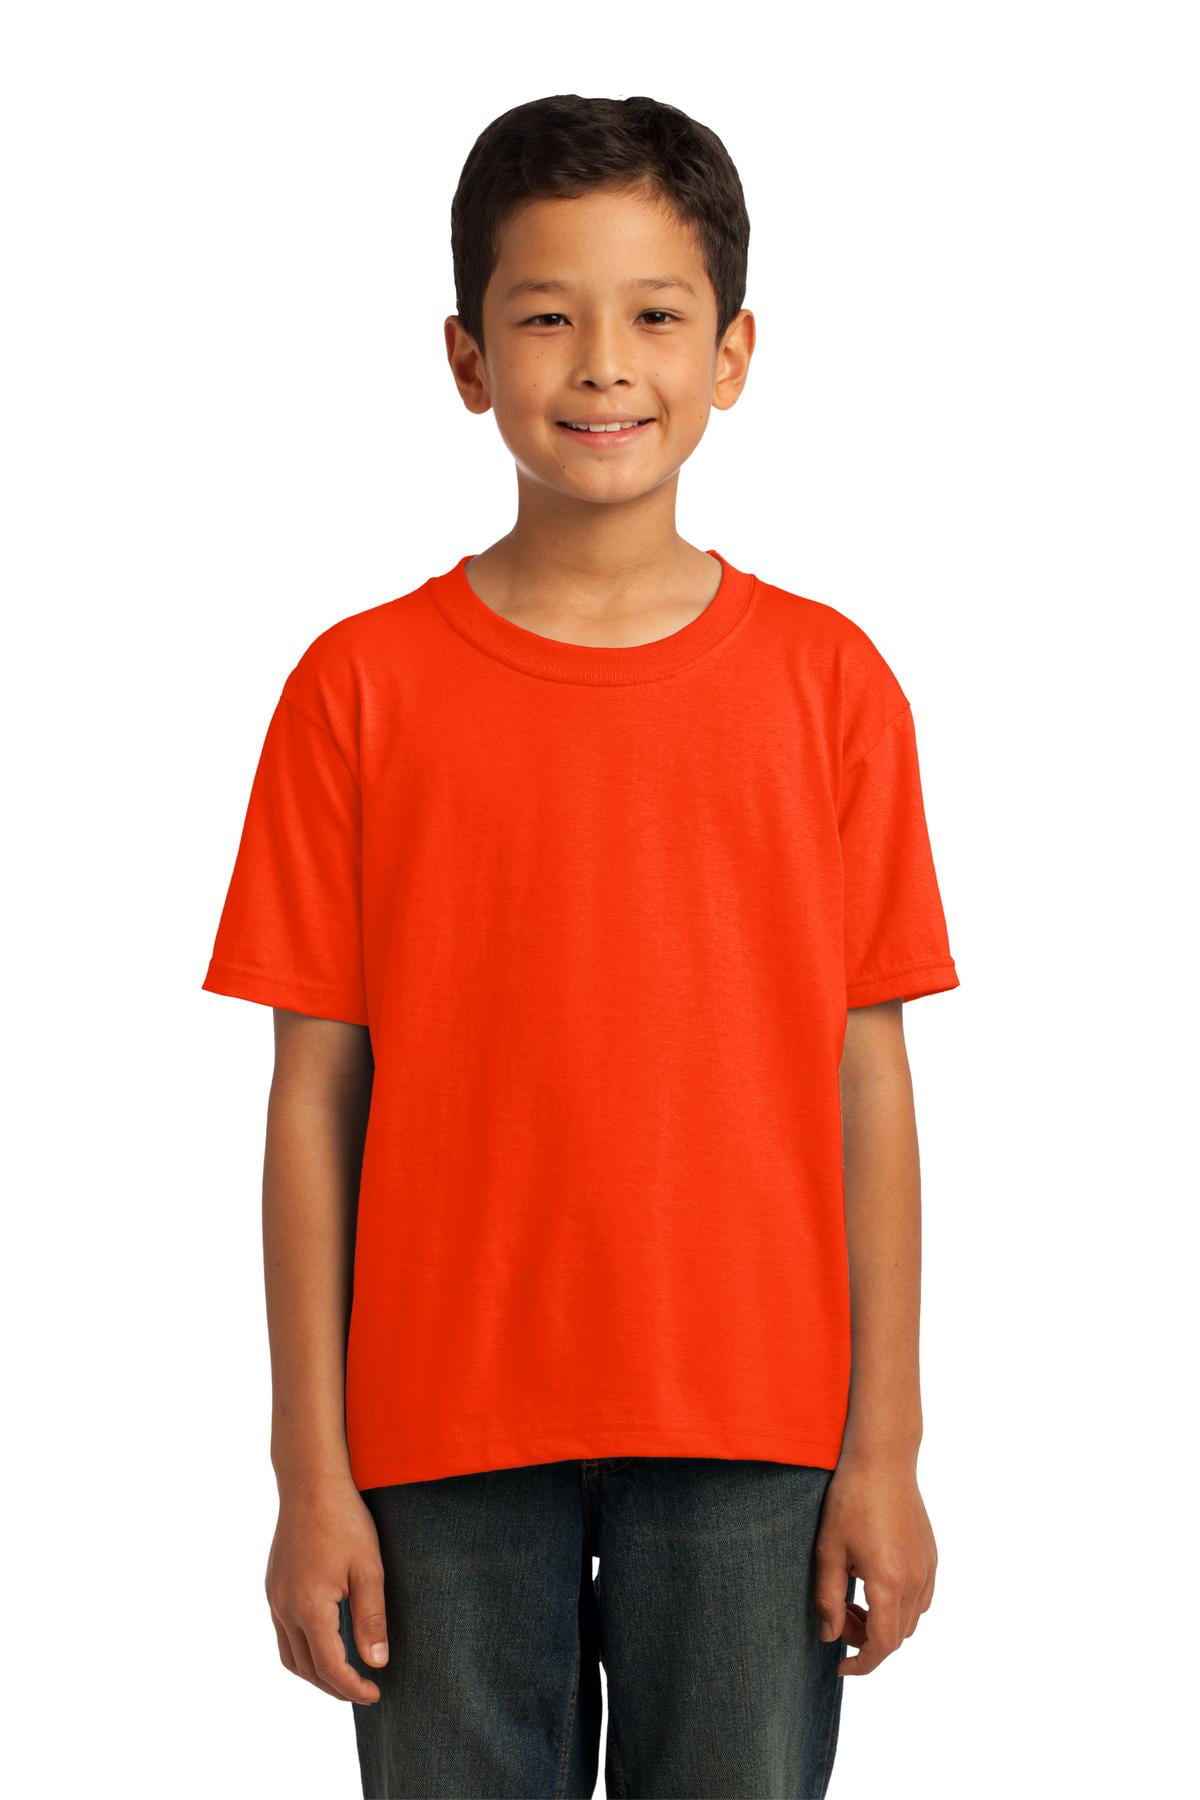 DISCONTINUED Fruit of the Loom ® Youth HD Cotton ™ Cotton T-Shirt. 3930B Walmart.com